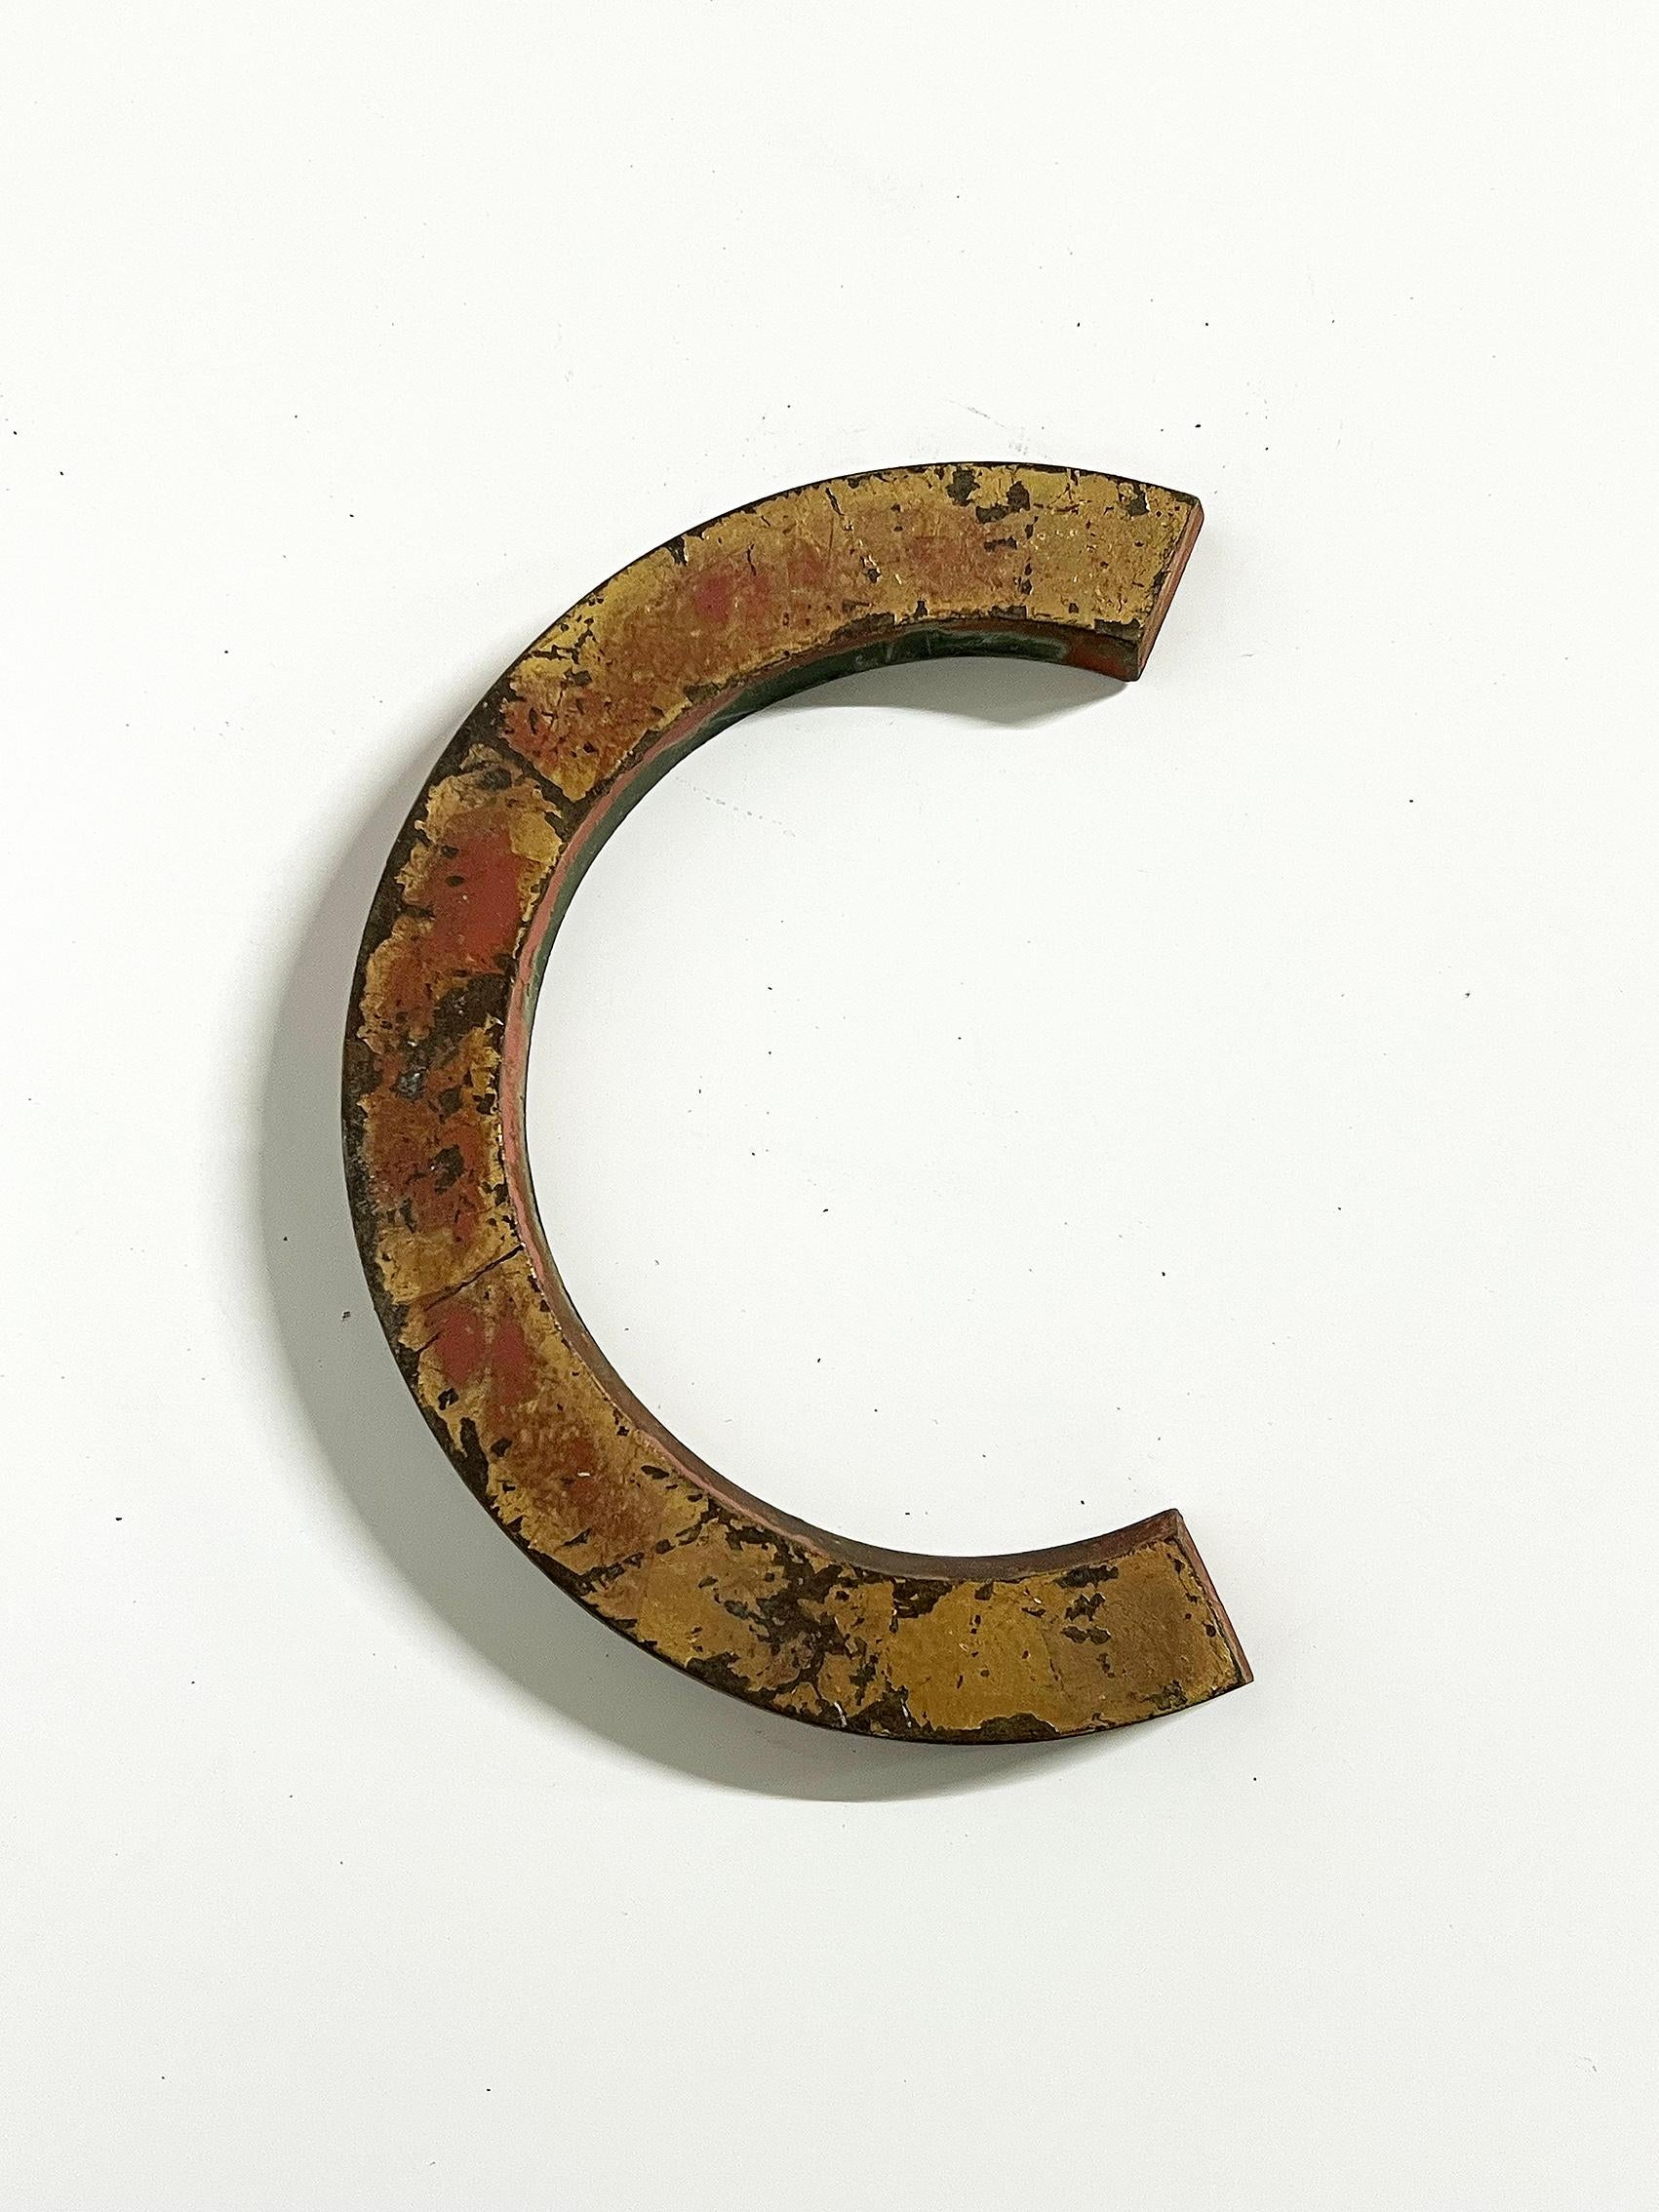 Vintage letter C in solid brass, covered with old paint (red & gold), Sweden ca 1940's.
Wear and patina consistent with age and use. Paint loss as seen on the pictures.
